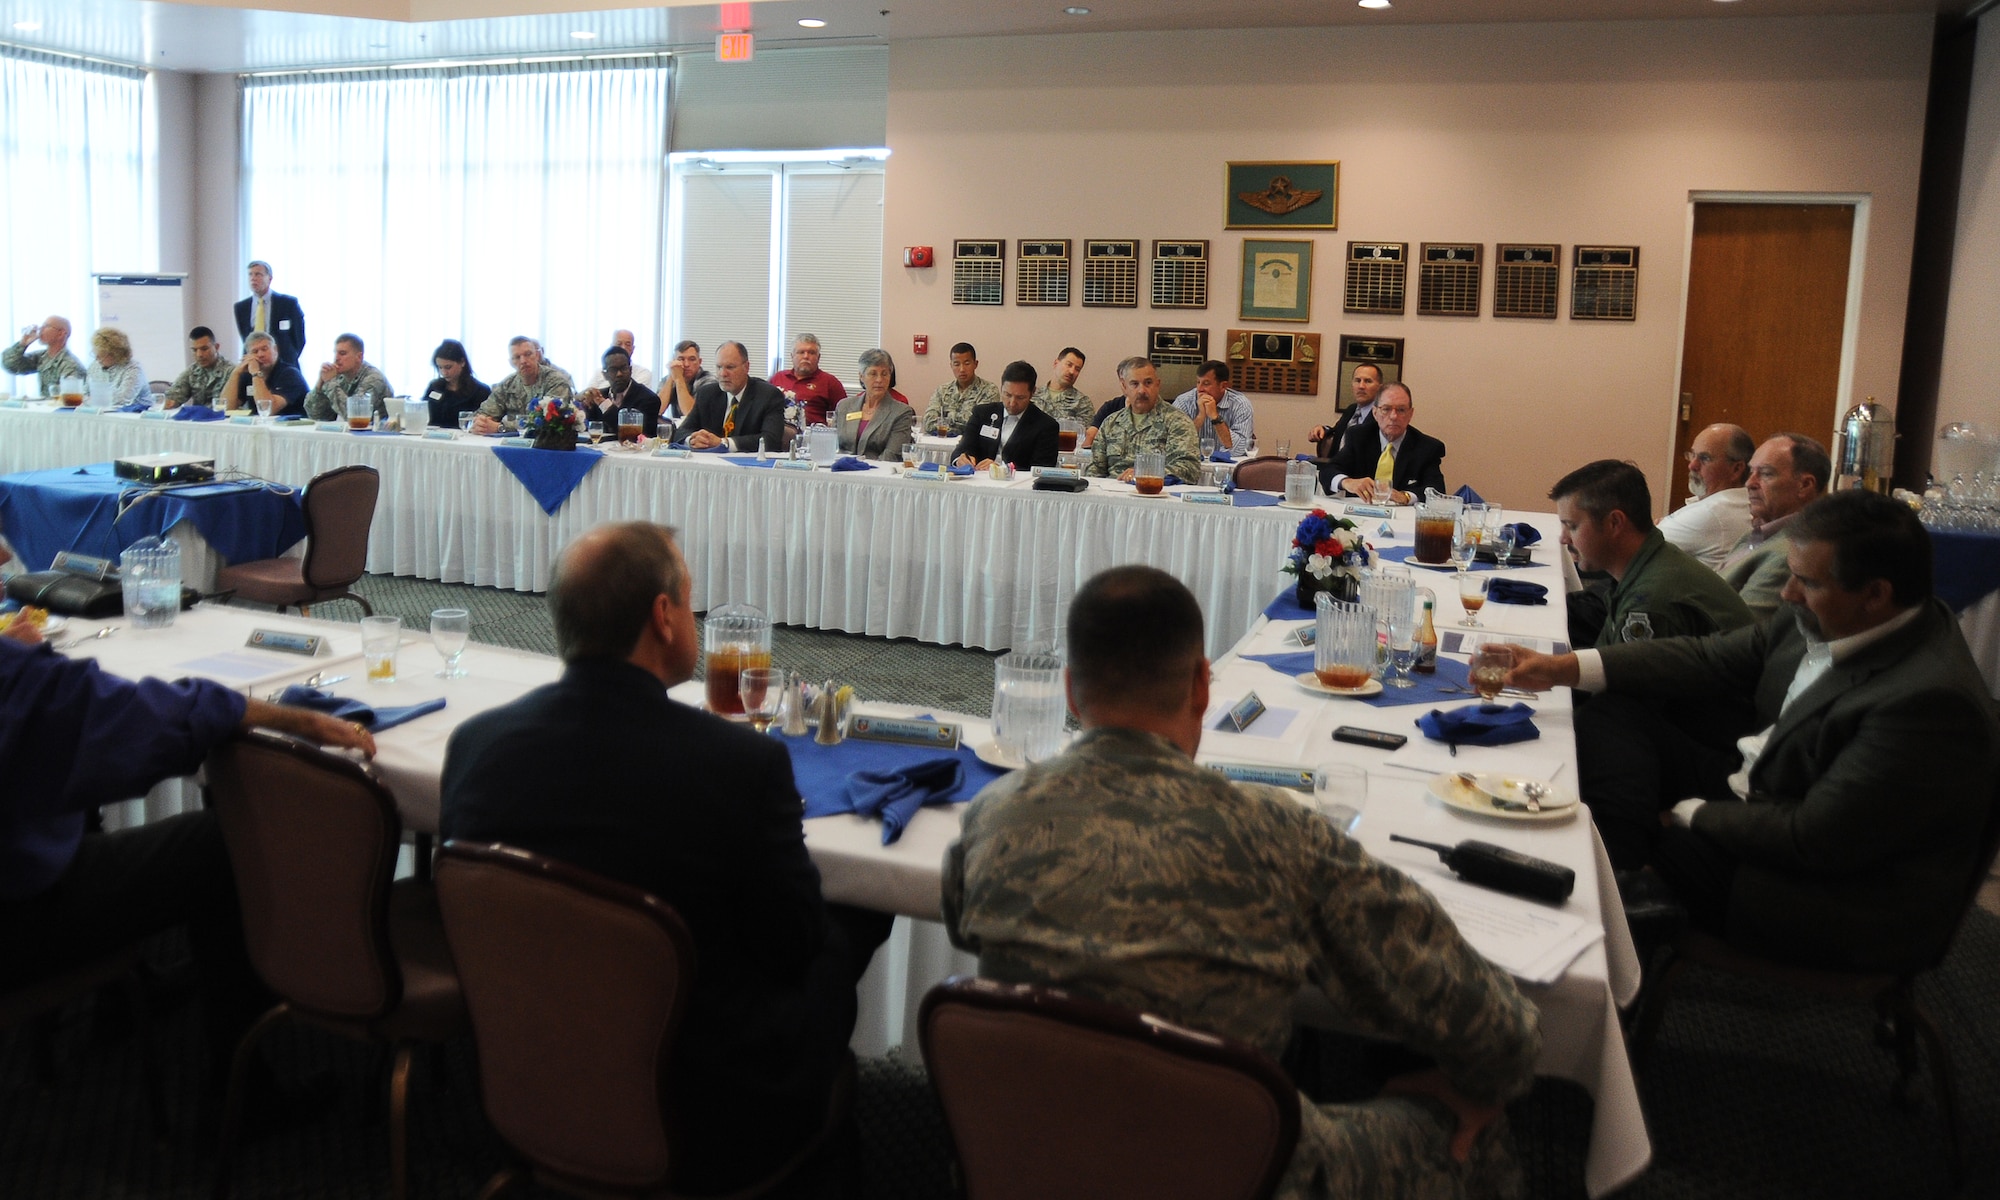 Around 50 members from Team Tyndall and the surrounding community came together March 21 during the P4: Public-Public; Public-Private Partnerships initiative meeting. P4 is a way for Air Force bases and their local communities to save money by using each other’s assets creatively to solve problems. (U.S. Air Force photo by Airman 1st Class Alex Echols)